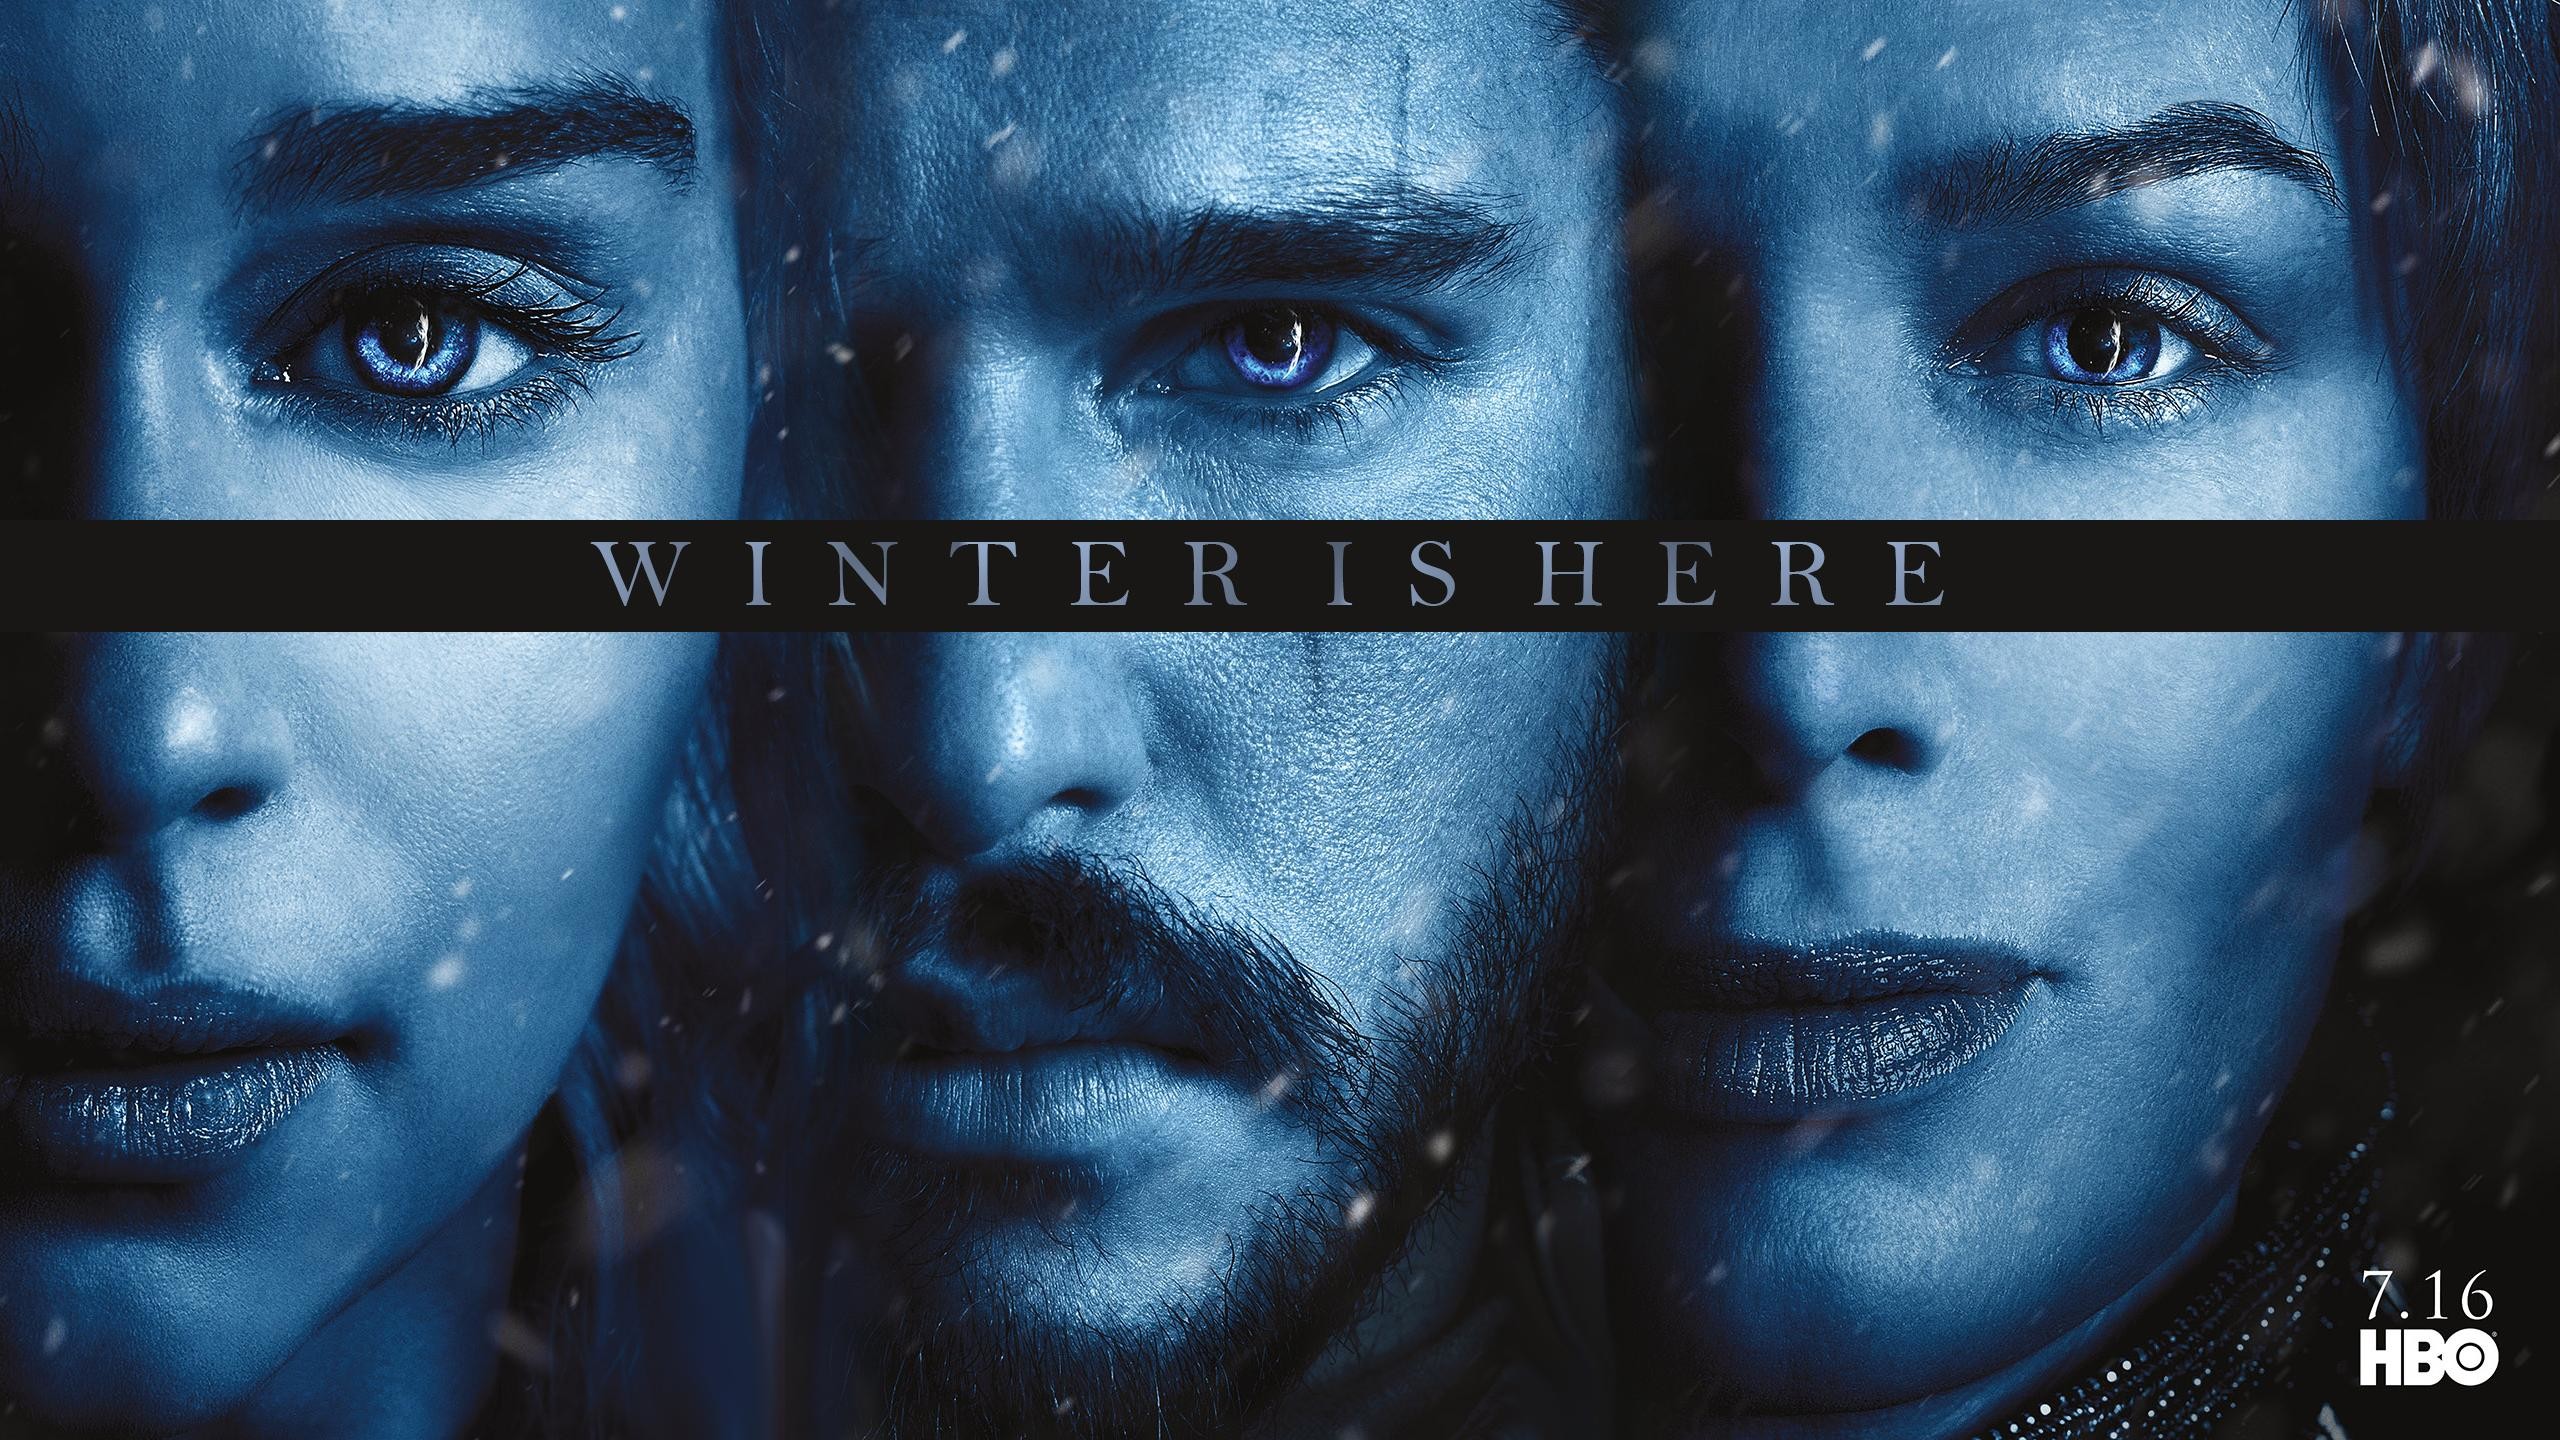 LimitedS7 Game Of thrones Season 7 Posters Wallpaper 2560 x 1440 1080p in comments